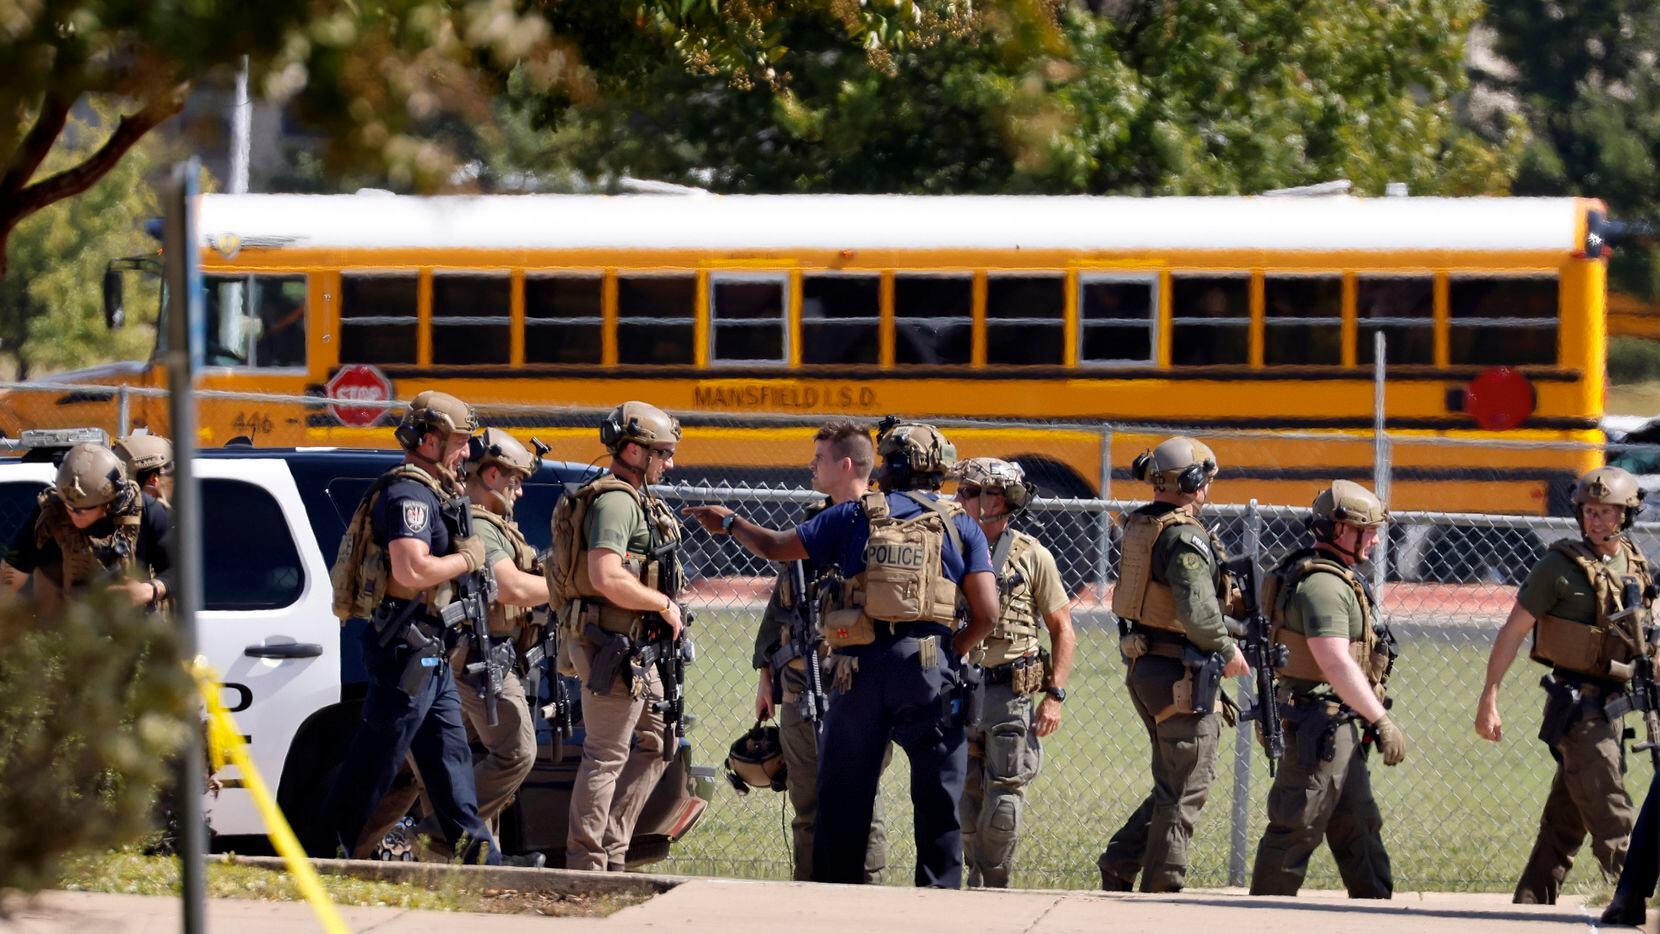 Tactical officers clear the scene following a shooting inside Mansfield Timberview High School in Arlington, Texas, Wednesday, October 6, 2021. Four people were injured in the shooting and the suspect turned himself into the Arlington police. (Tom Fox/The Dallas Morning News) 